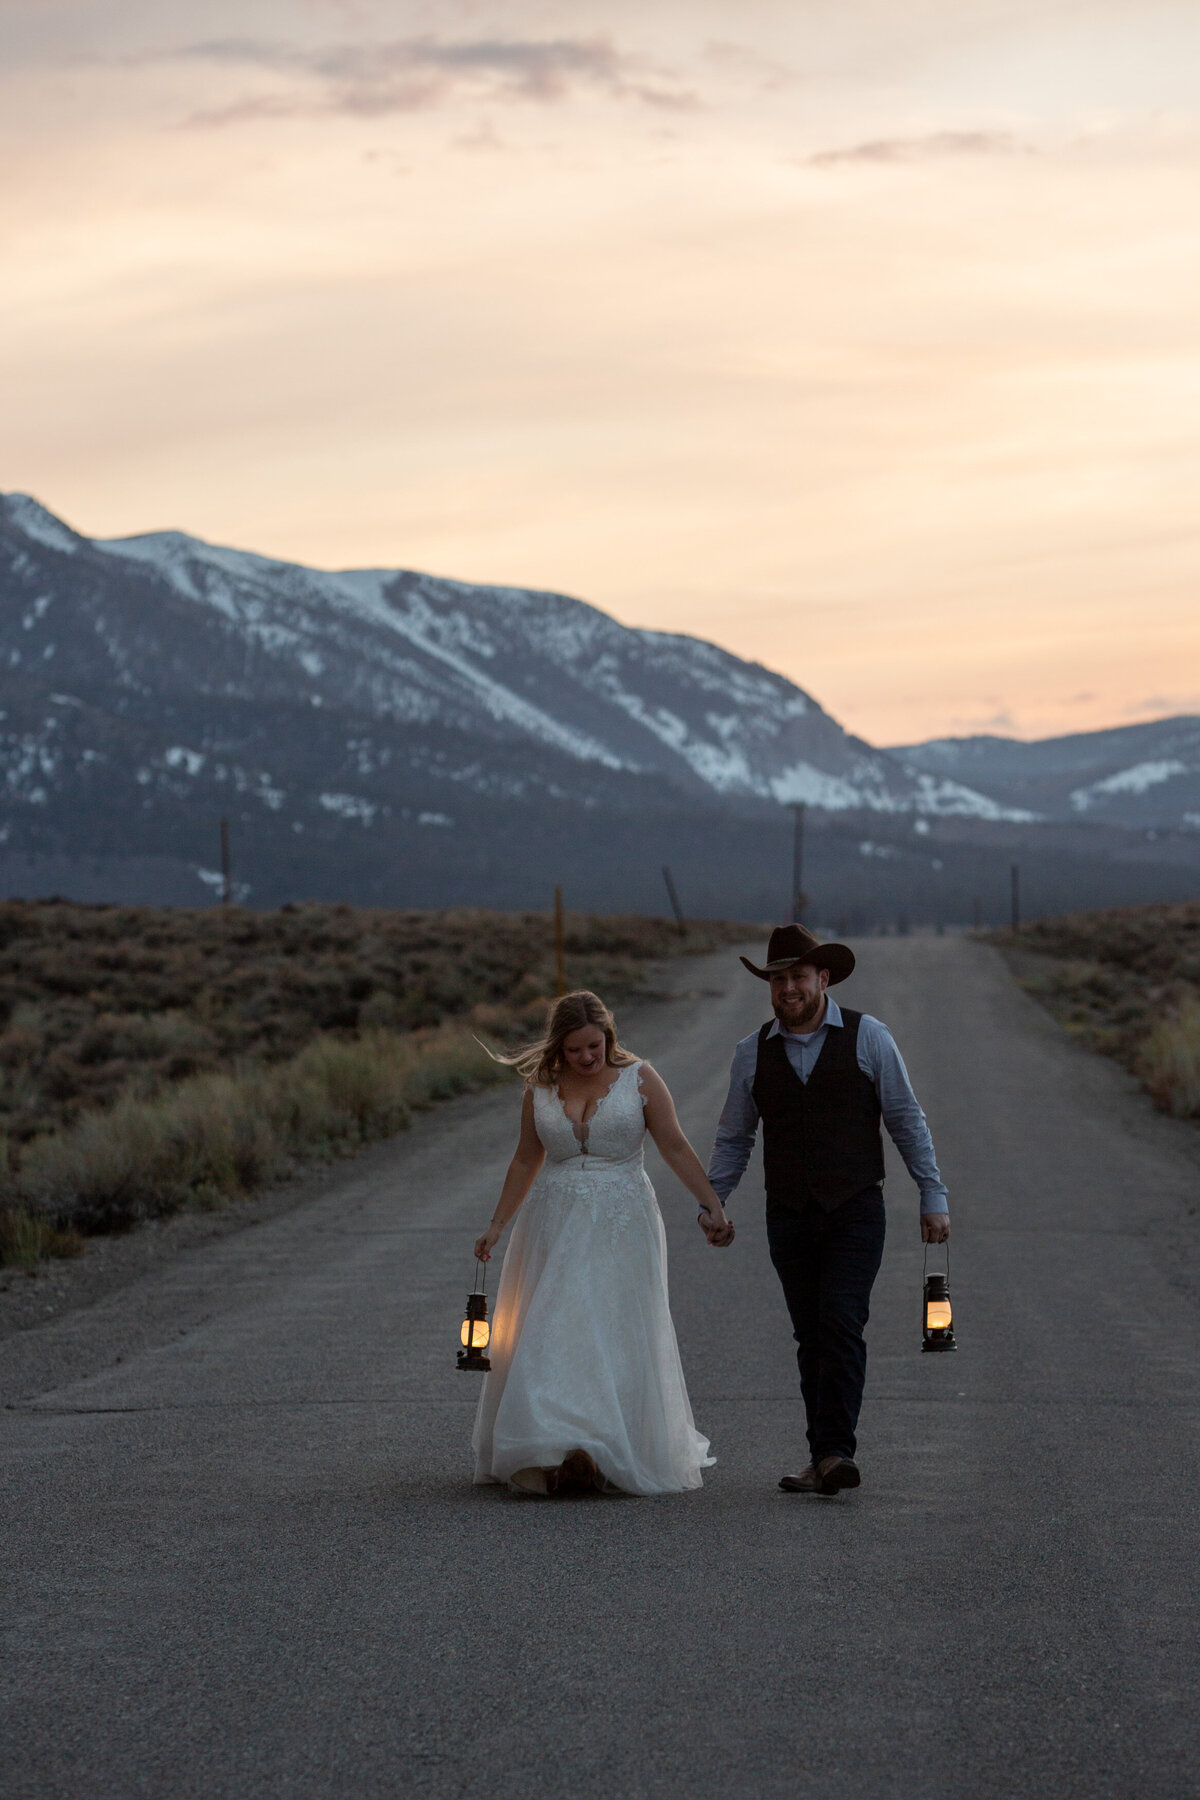 A bride and groom walk down a road in Mammoth, holding hands and holding lanterns as the sunsets behind them.